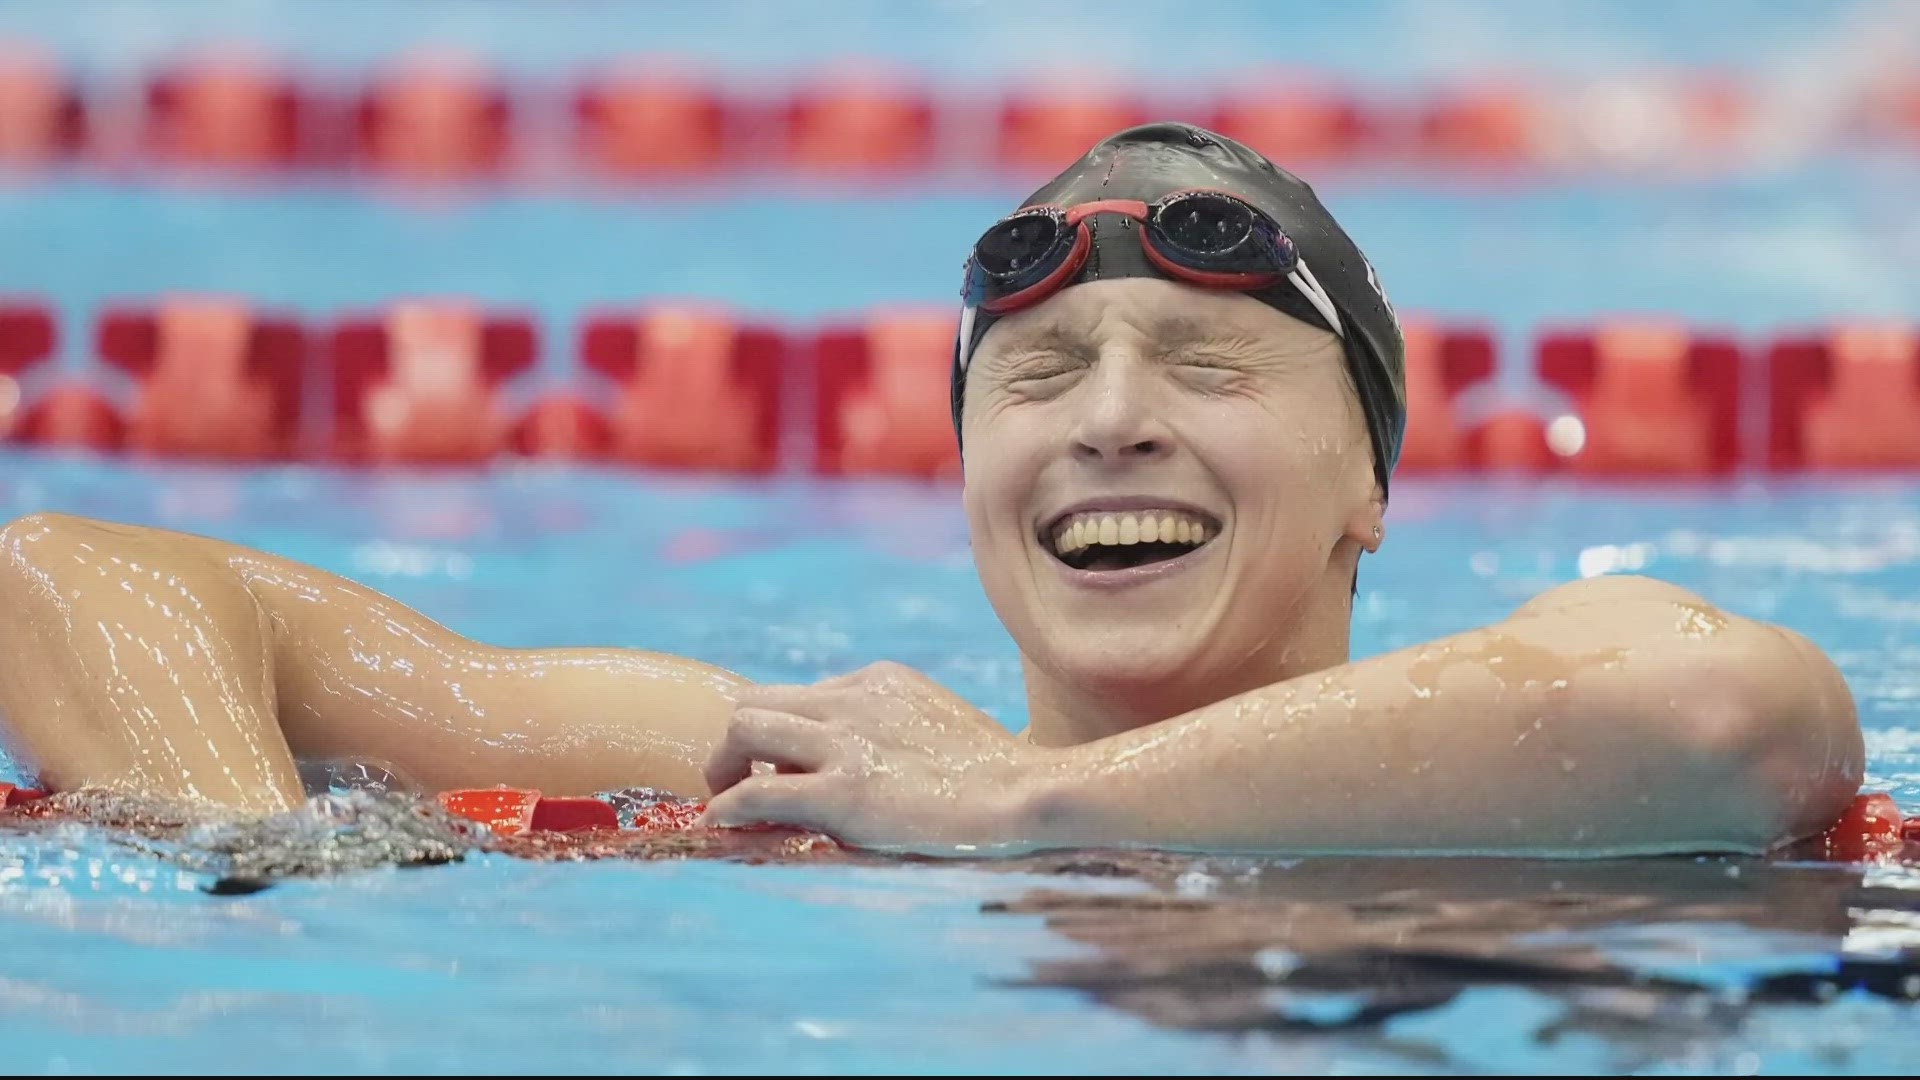 The 26-year-old American won the 800-meter freestyle on Saturday at the world championships to become the first swimmer to win six golds in the same event at worlds.